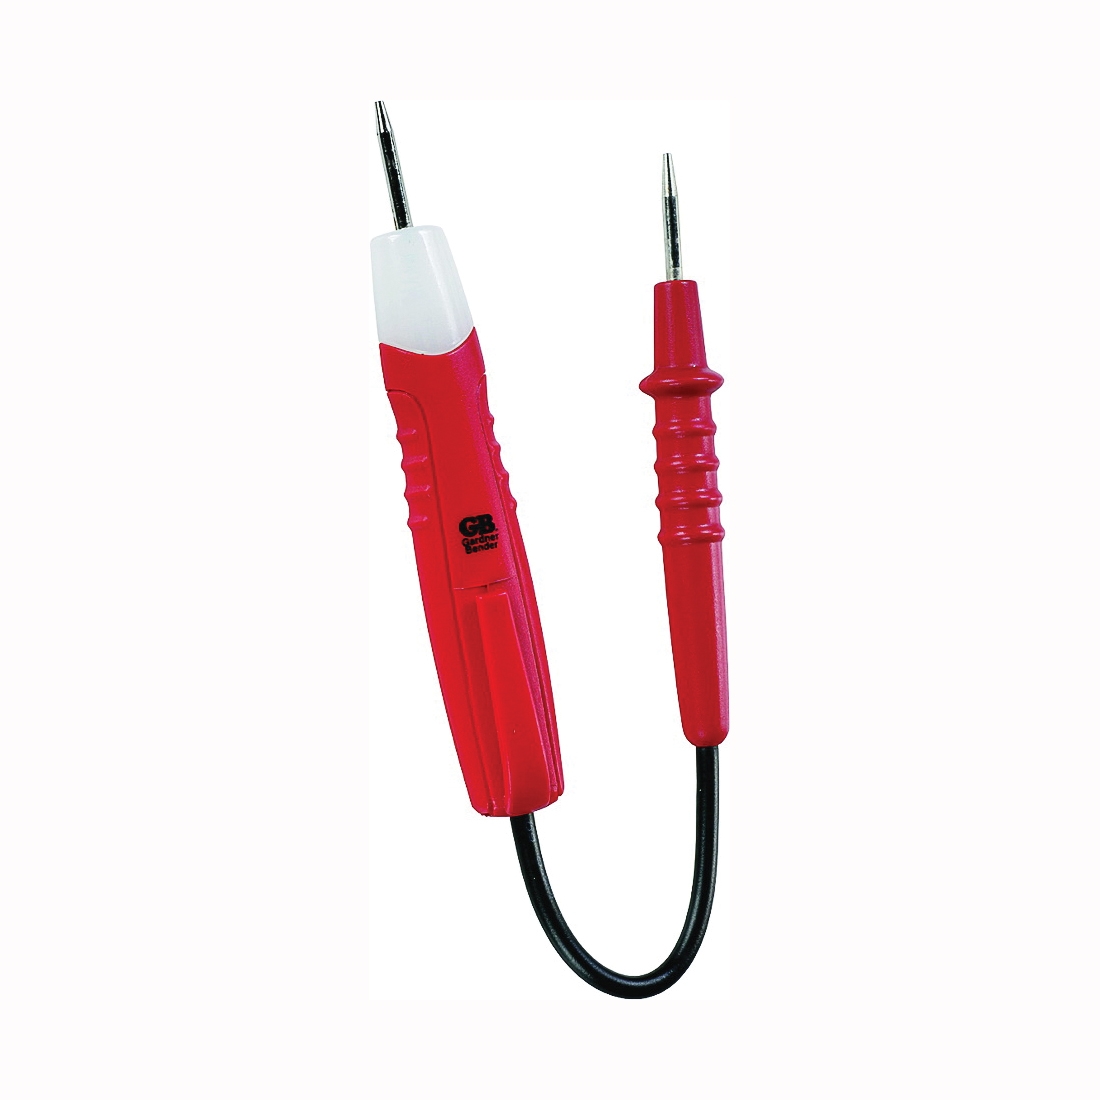 GET-3100 Circuit Tester, 80 to 250 VAC/VDC, Neondicator Display, Functions: Voltage, Red